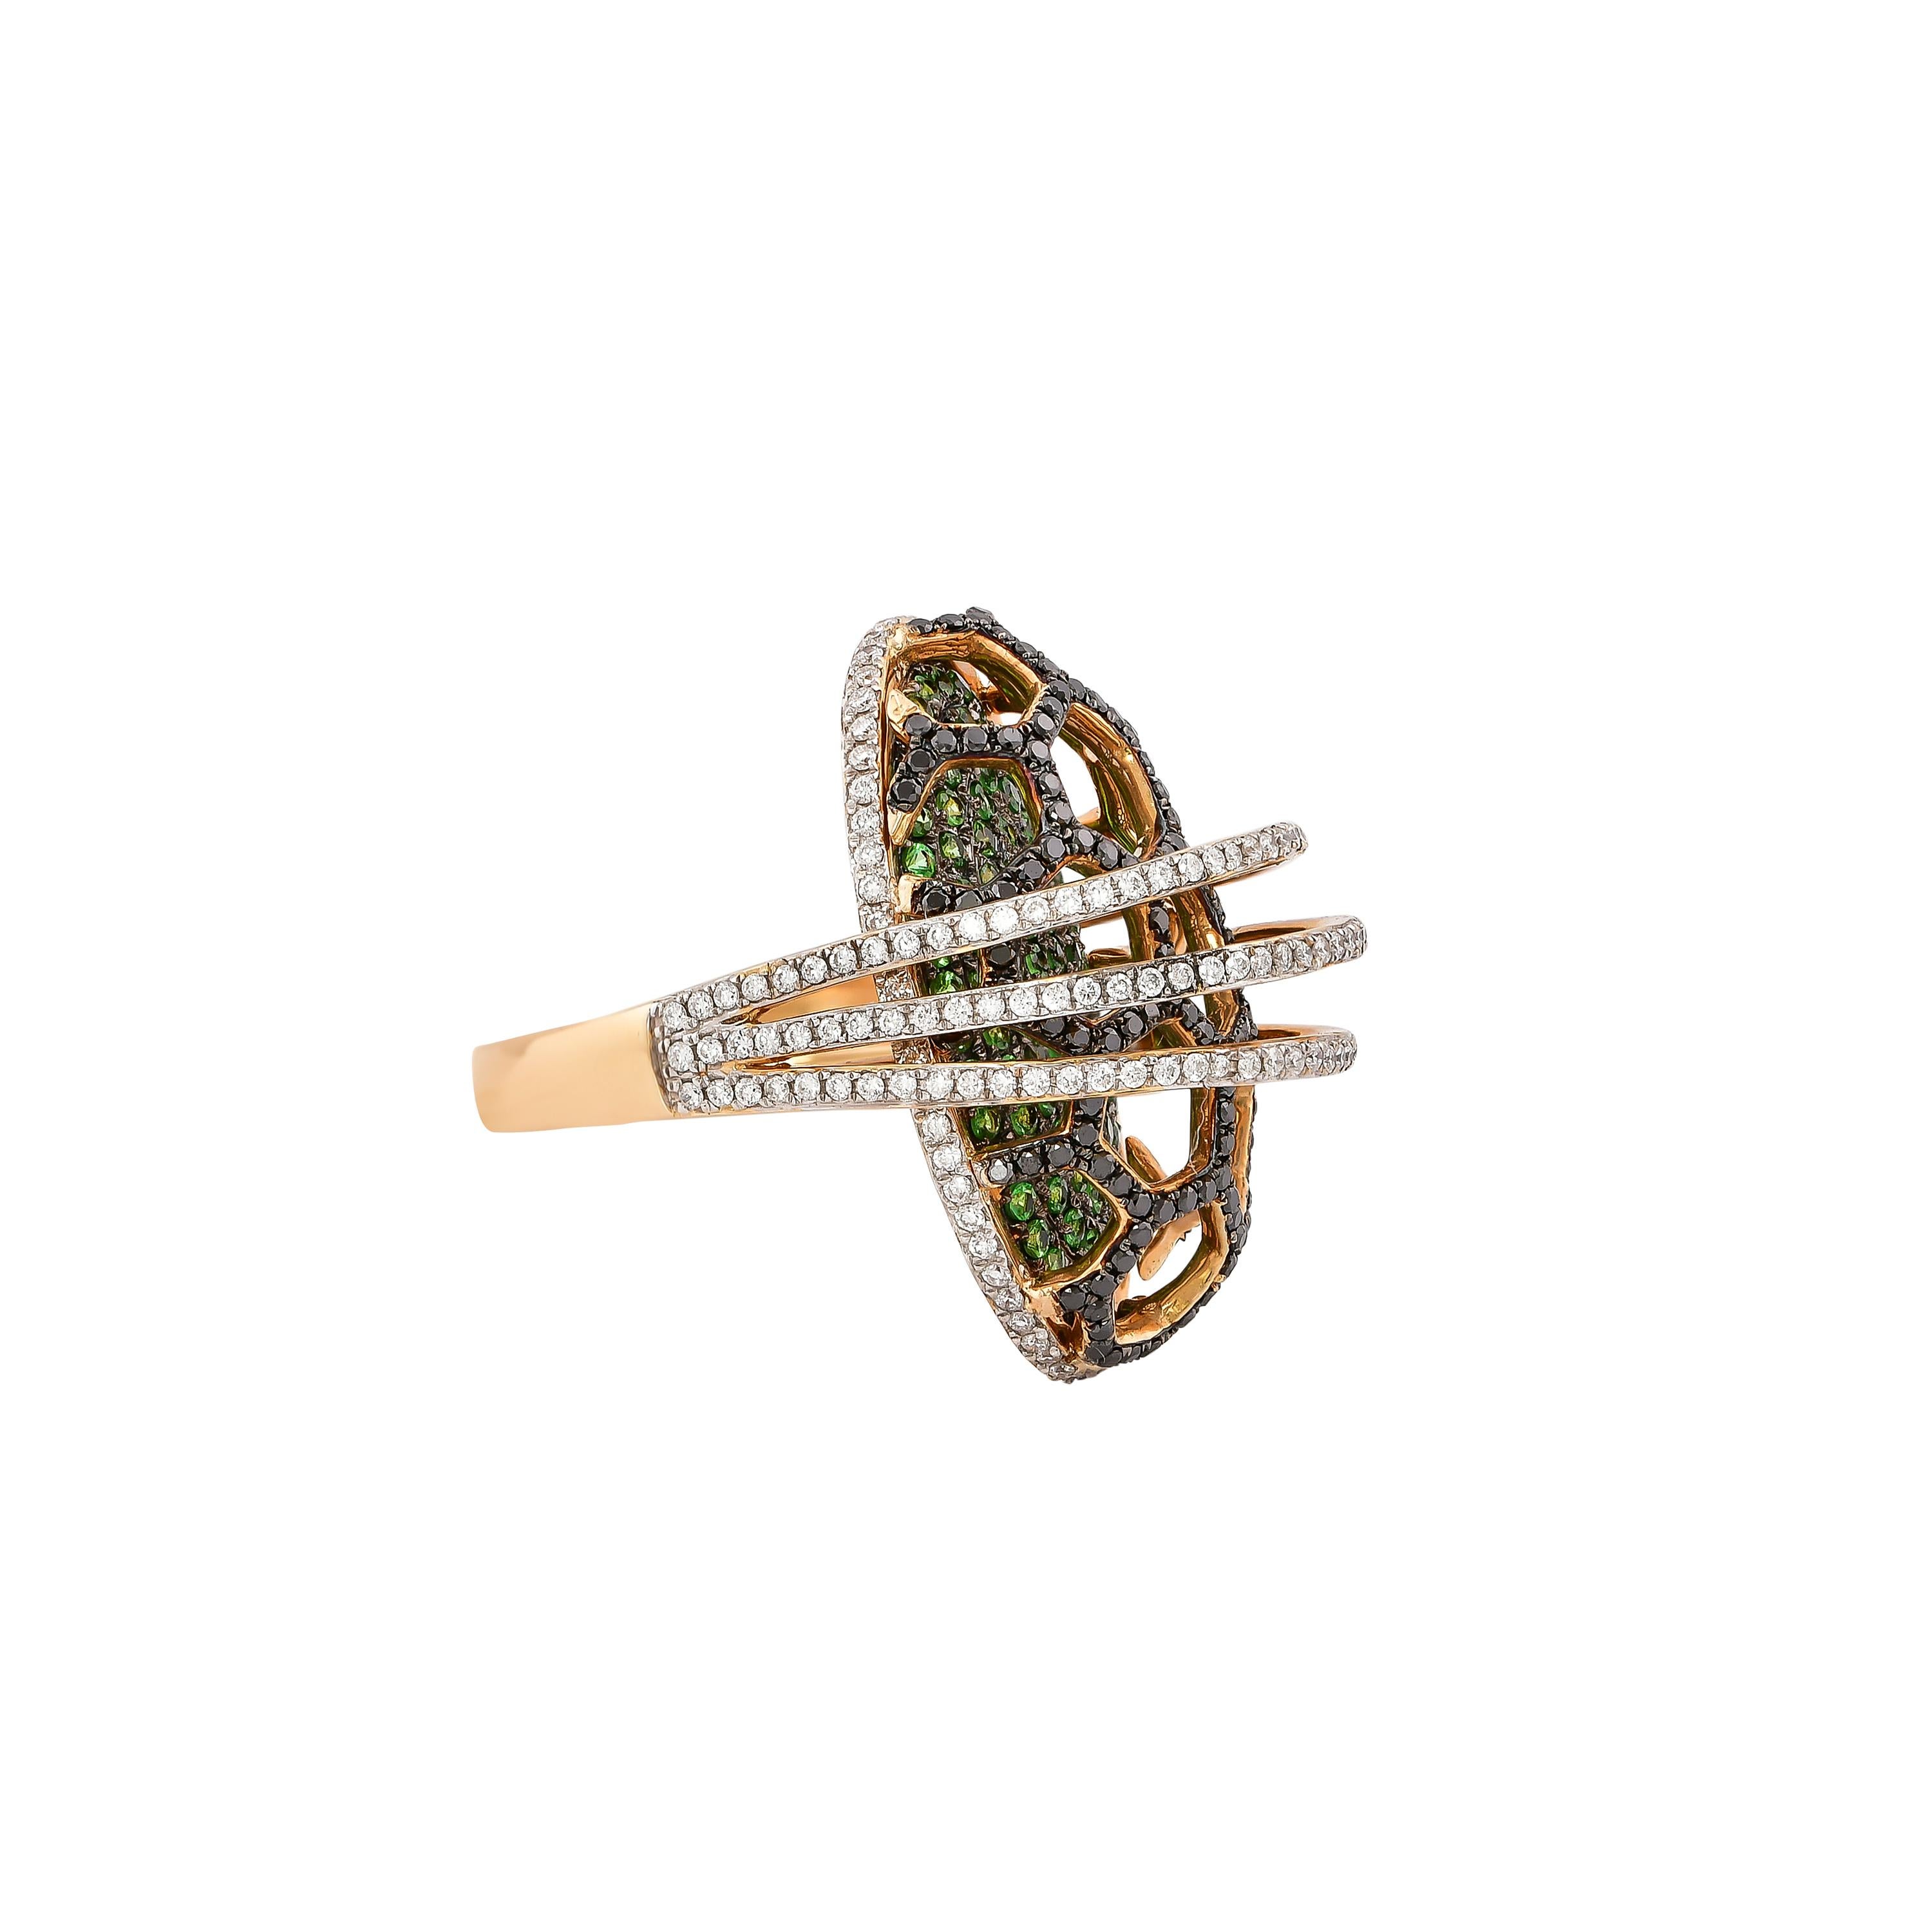 Sunita Nahata presents a collection of fancy cocktail rings with gorgeous gemstones. This ring uses a pave base of tsavorite with an architecturally constructed black and white diamond cage on top. This unique and contrasting design presents a